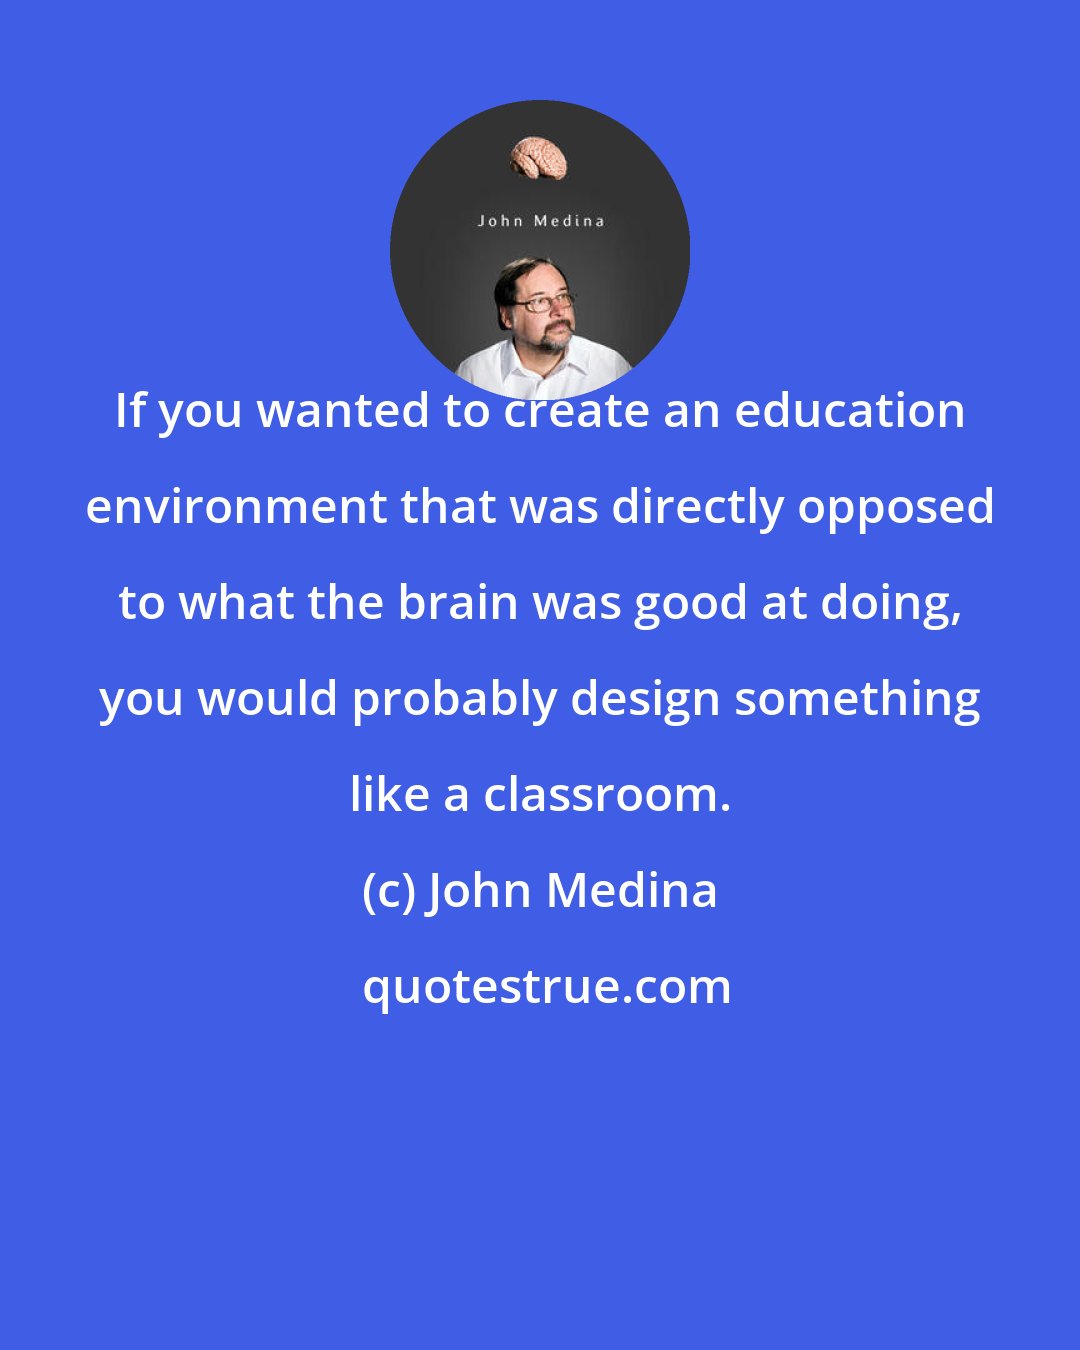 John Medina: If you wanted to create an education environment that was directly opposed to what the brain was good at doing, you would probably design something like a classroom.